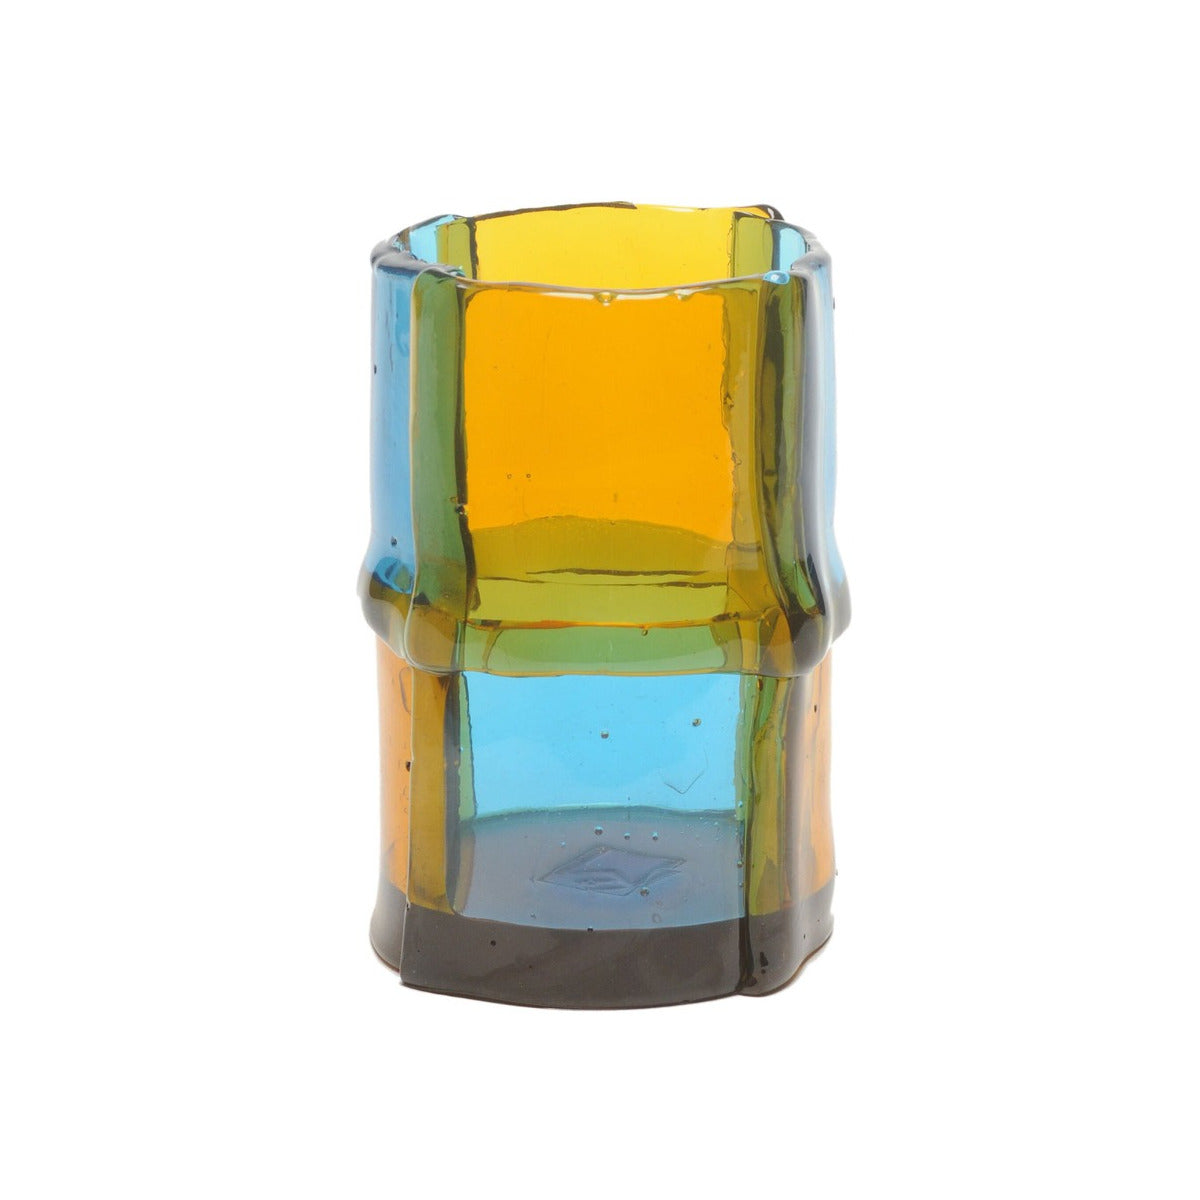 Enzo Mari Soft Resin Vase Small - Yellow and Blue